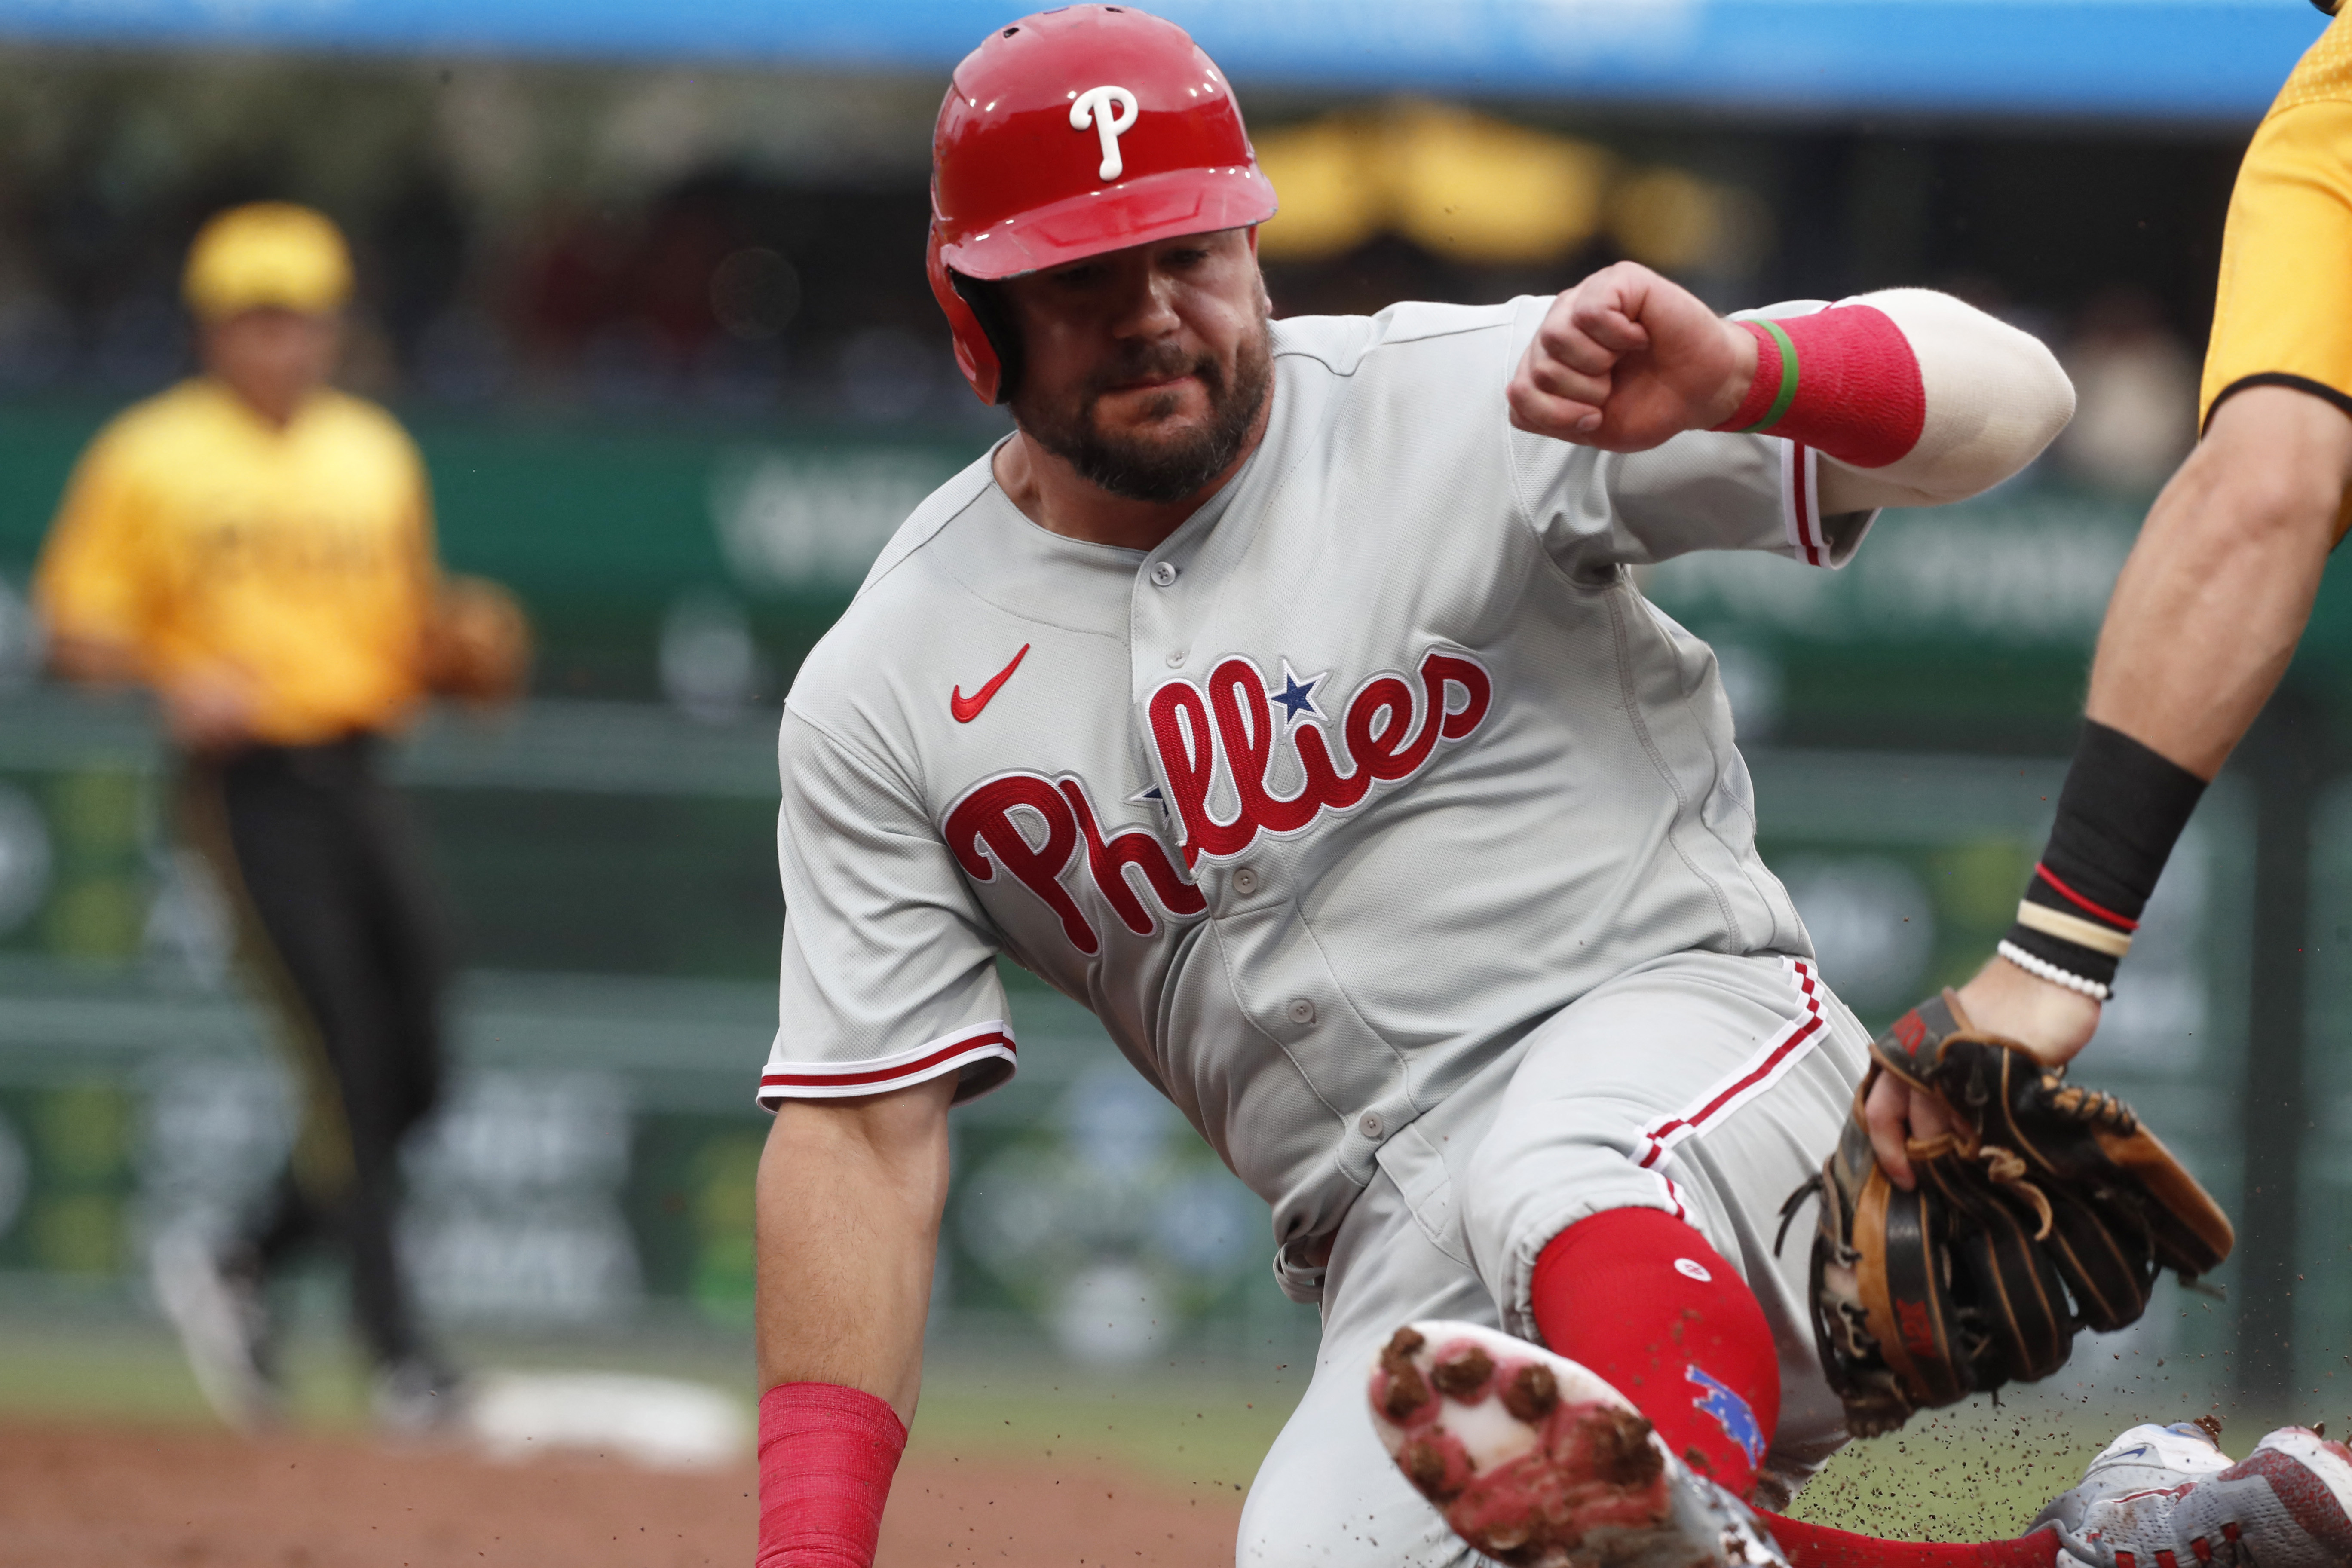 Kyle Schwarber blasted a 2-run HR as Phillies edged-Pirates